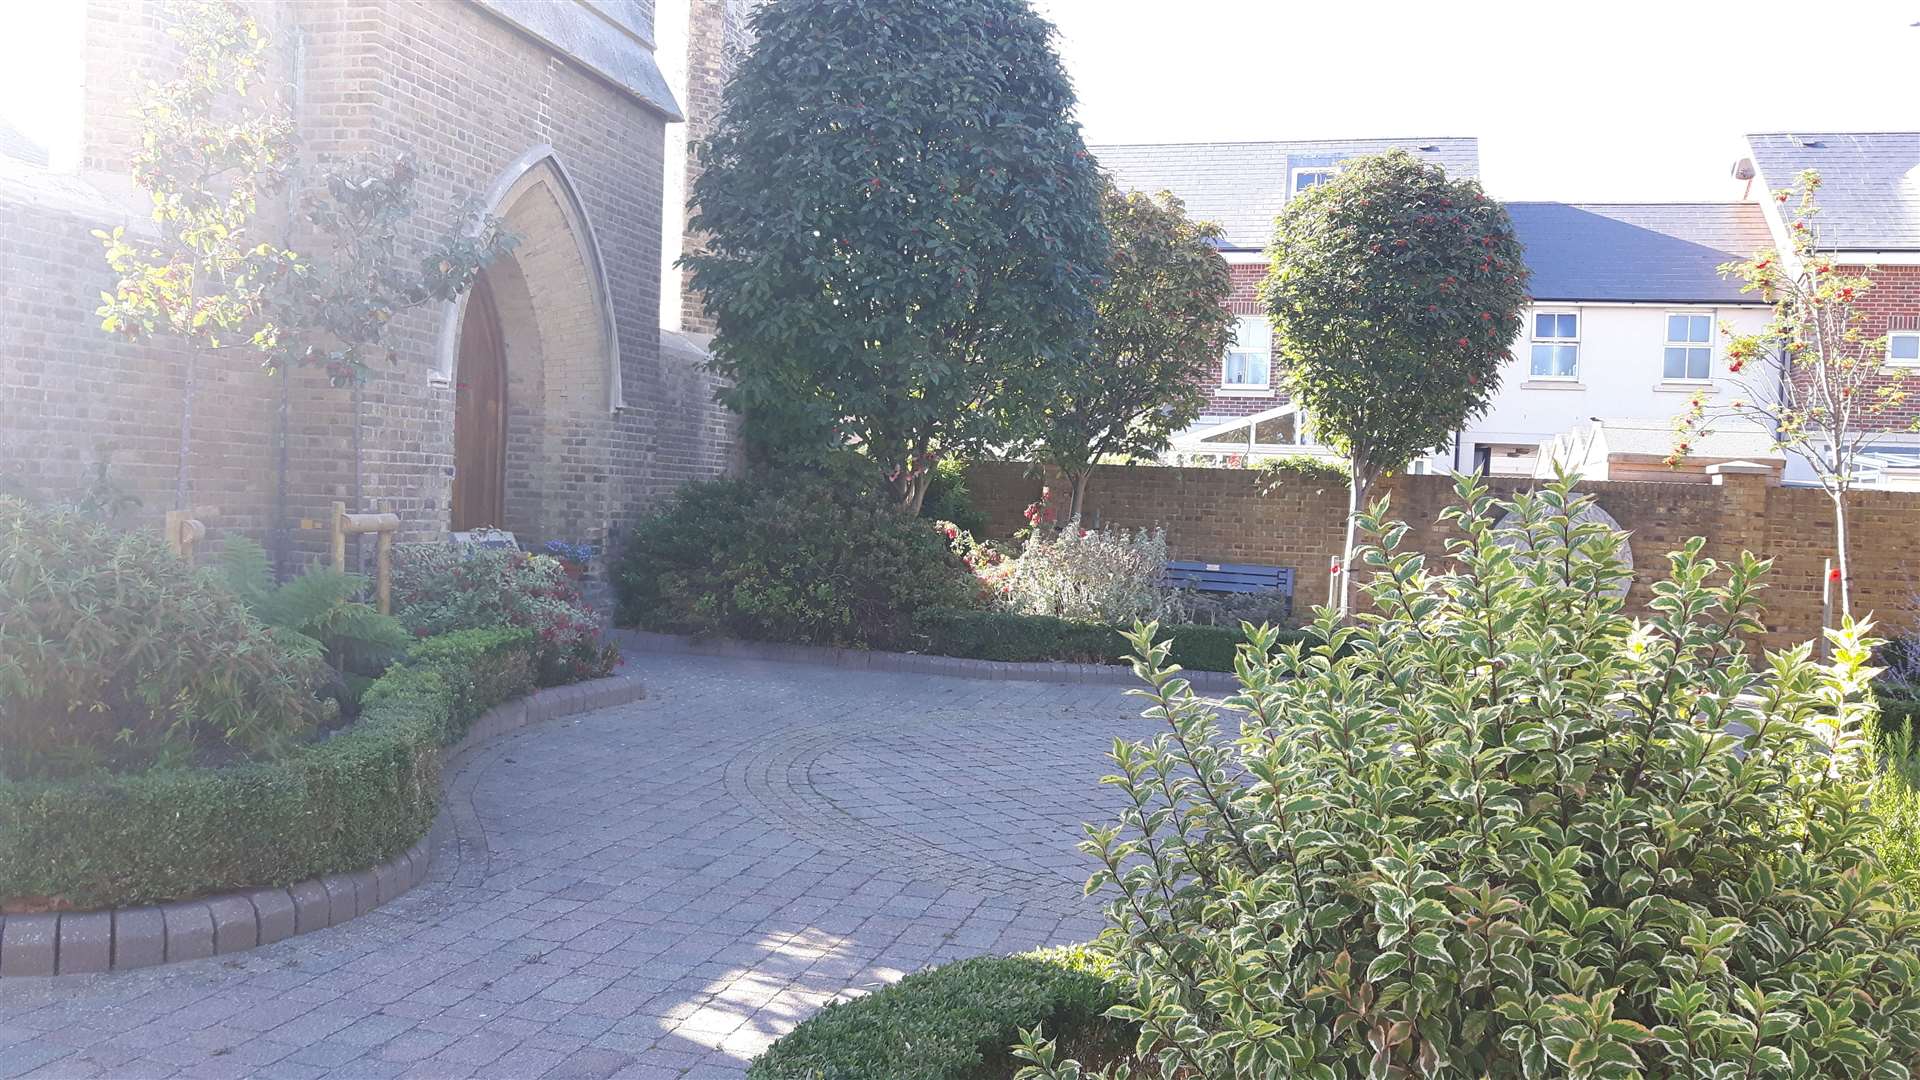 The Royal Marines Memorial Garden, is built on the site where the IRA's bomb was detonated. It was hidden in a sofa in the Coffee Boat recreation room in the barracks at Canada Road, Walmer